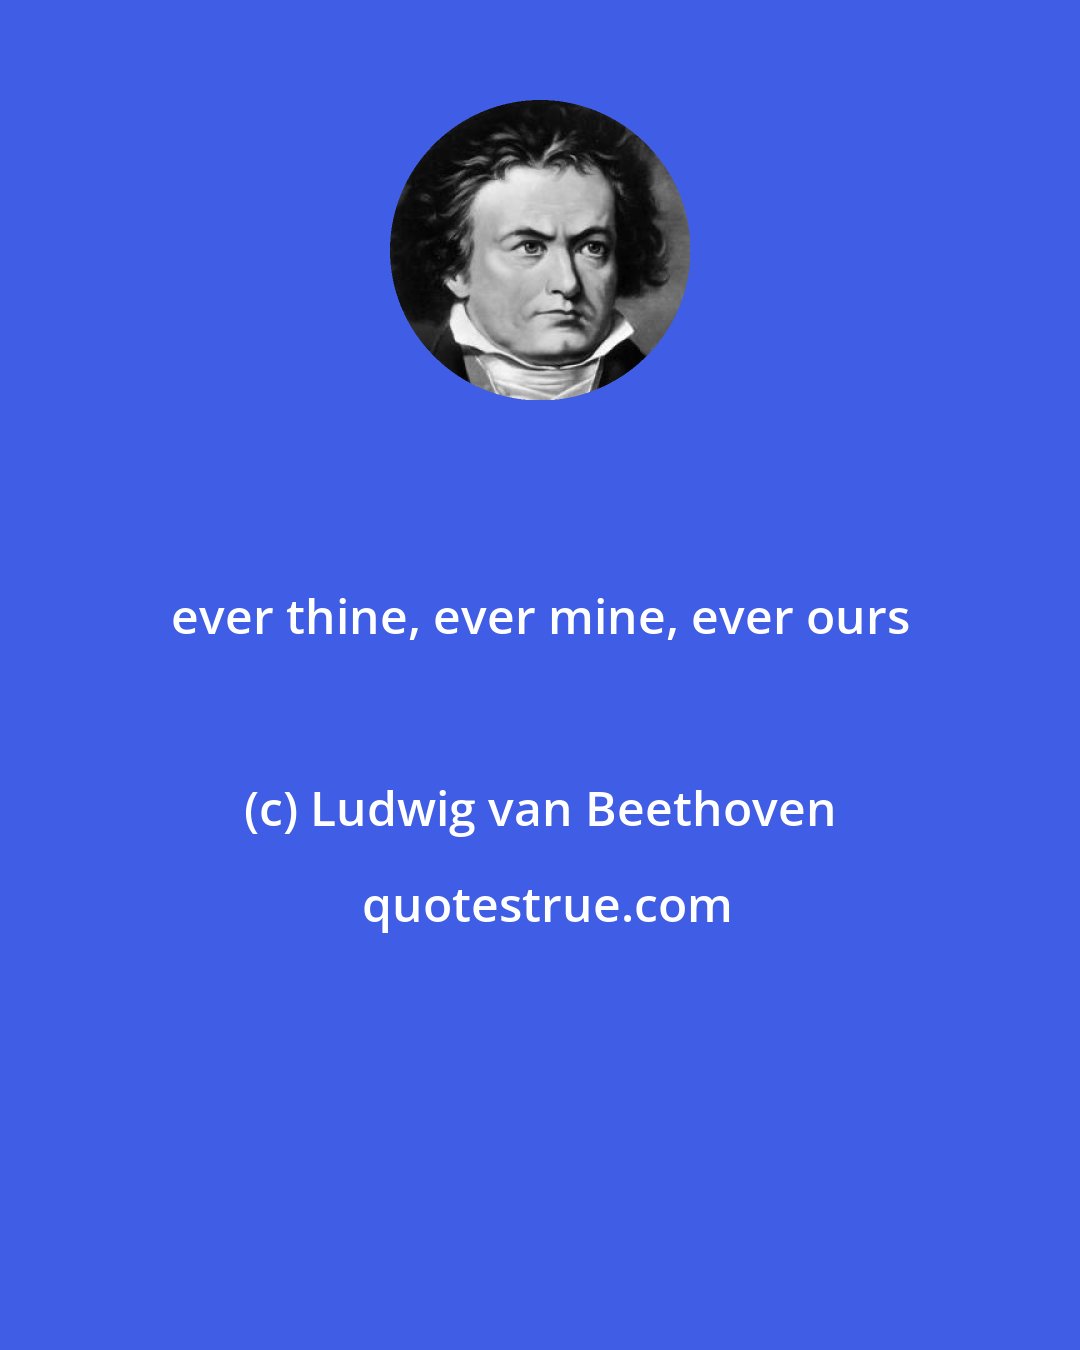 Ludwig van Beethoven: ever thine, ever mine, ever ours